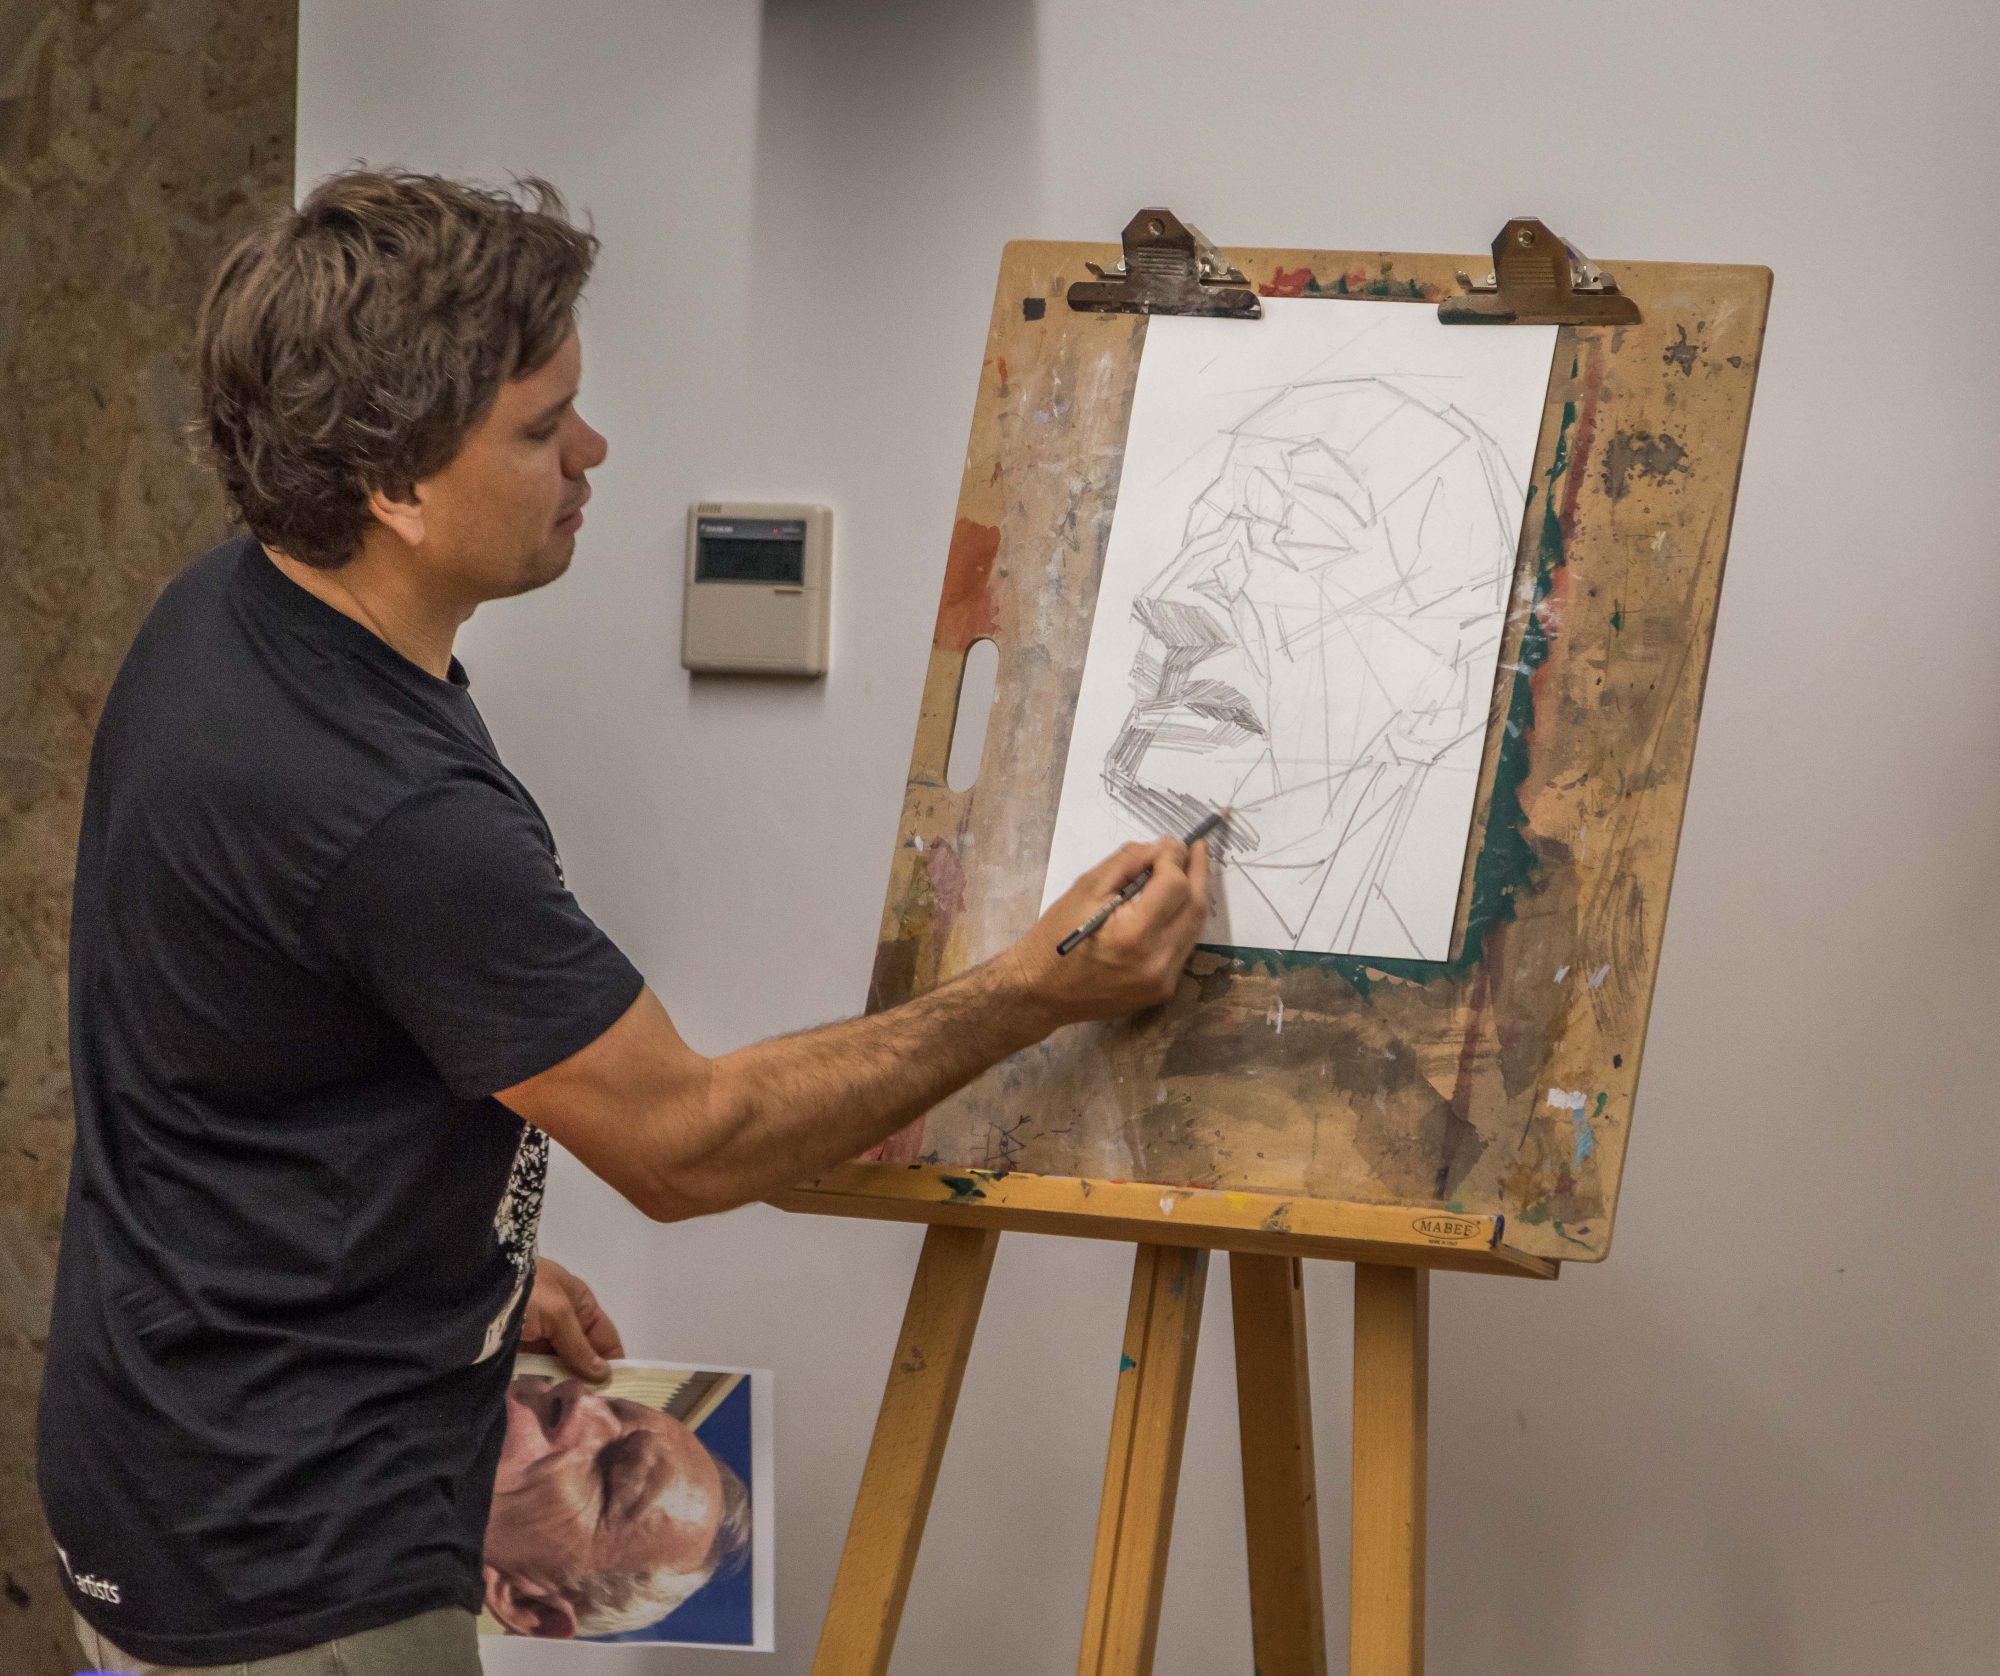 Artist in Residence Commences at the College